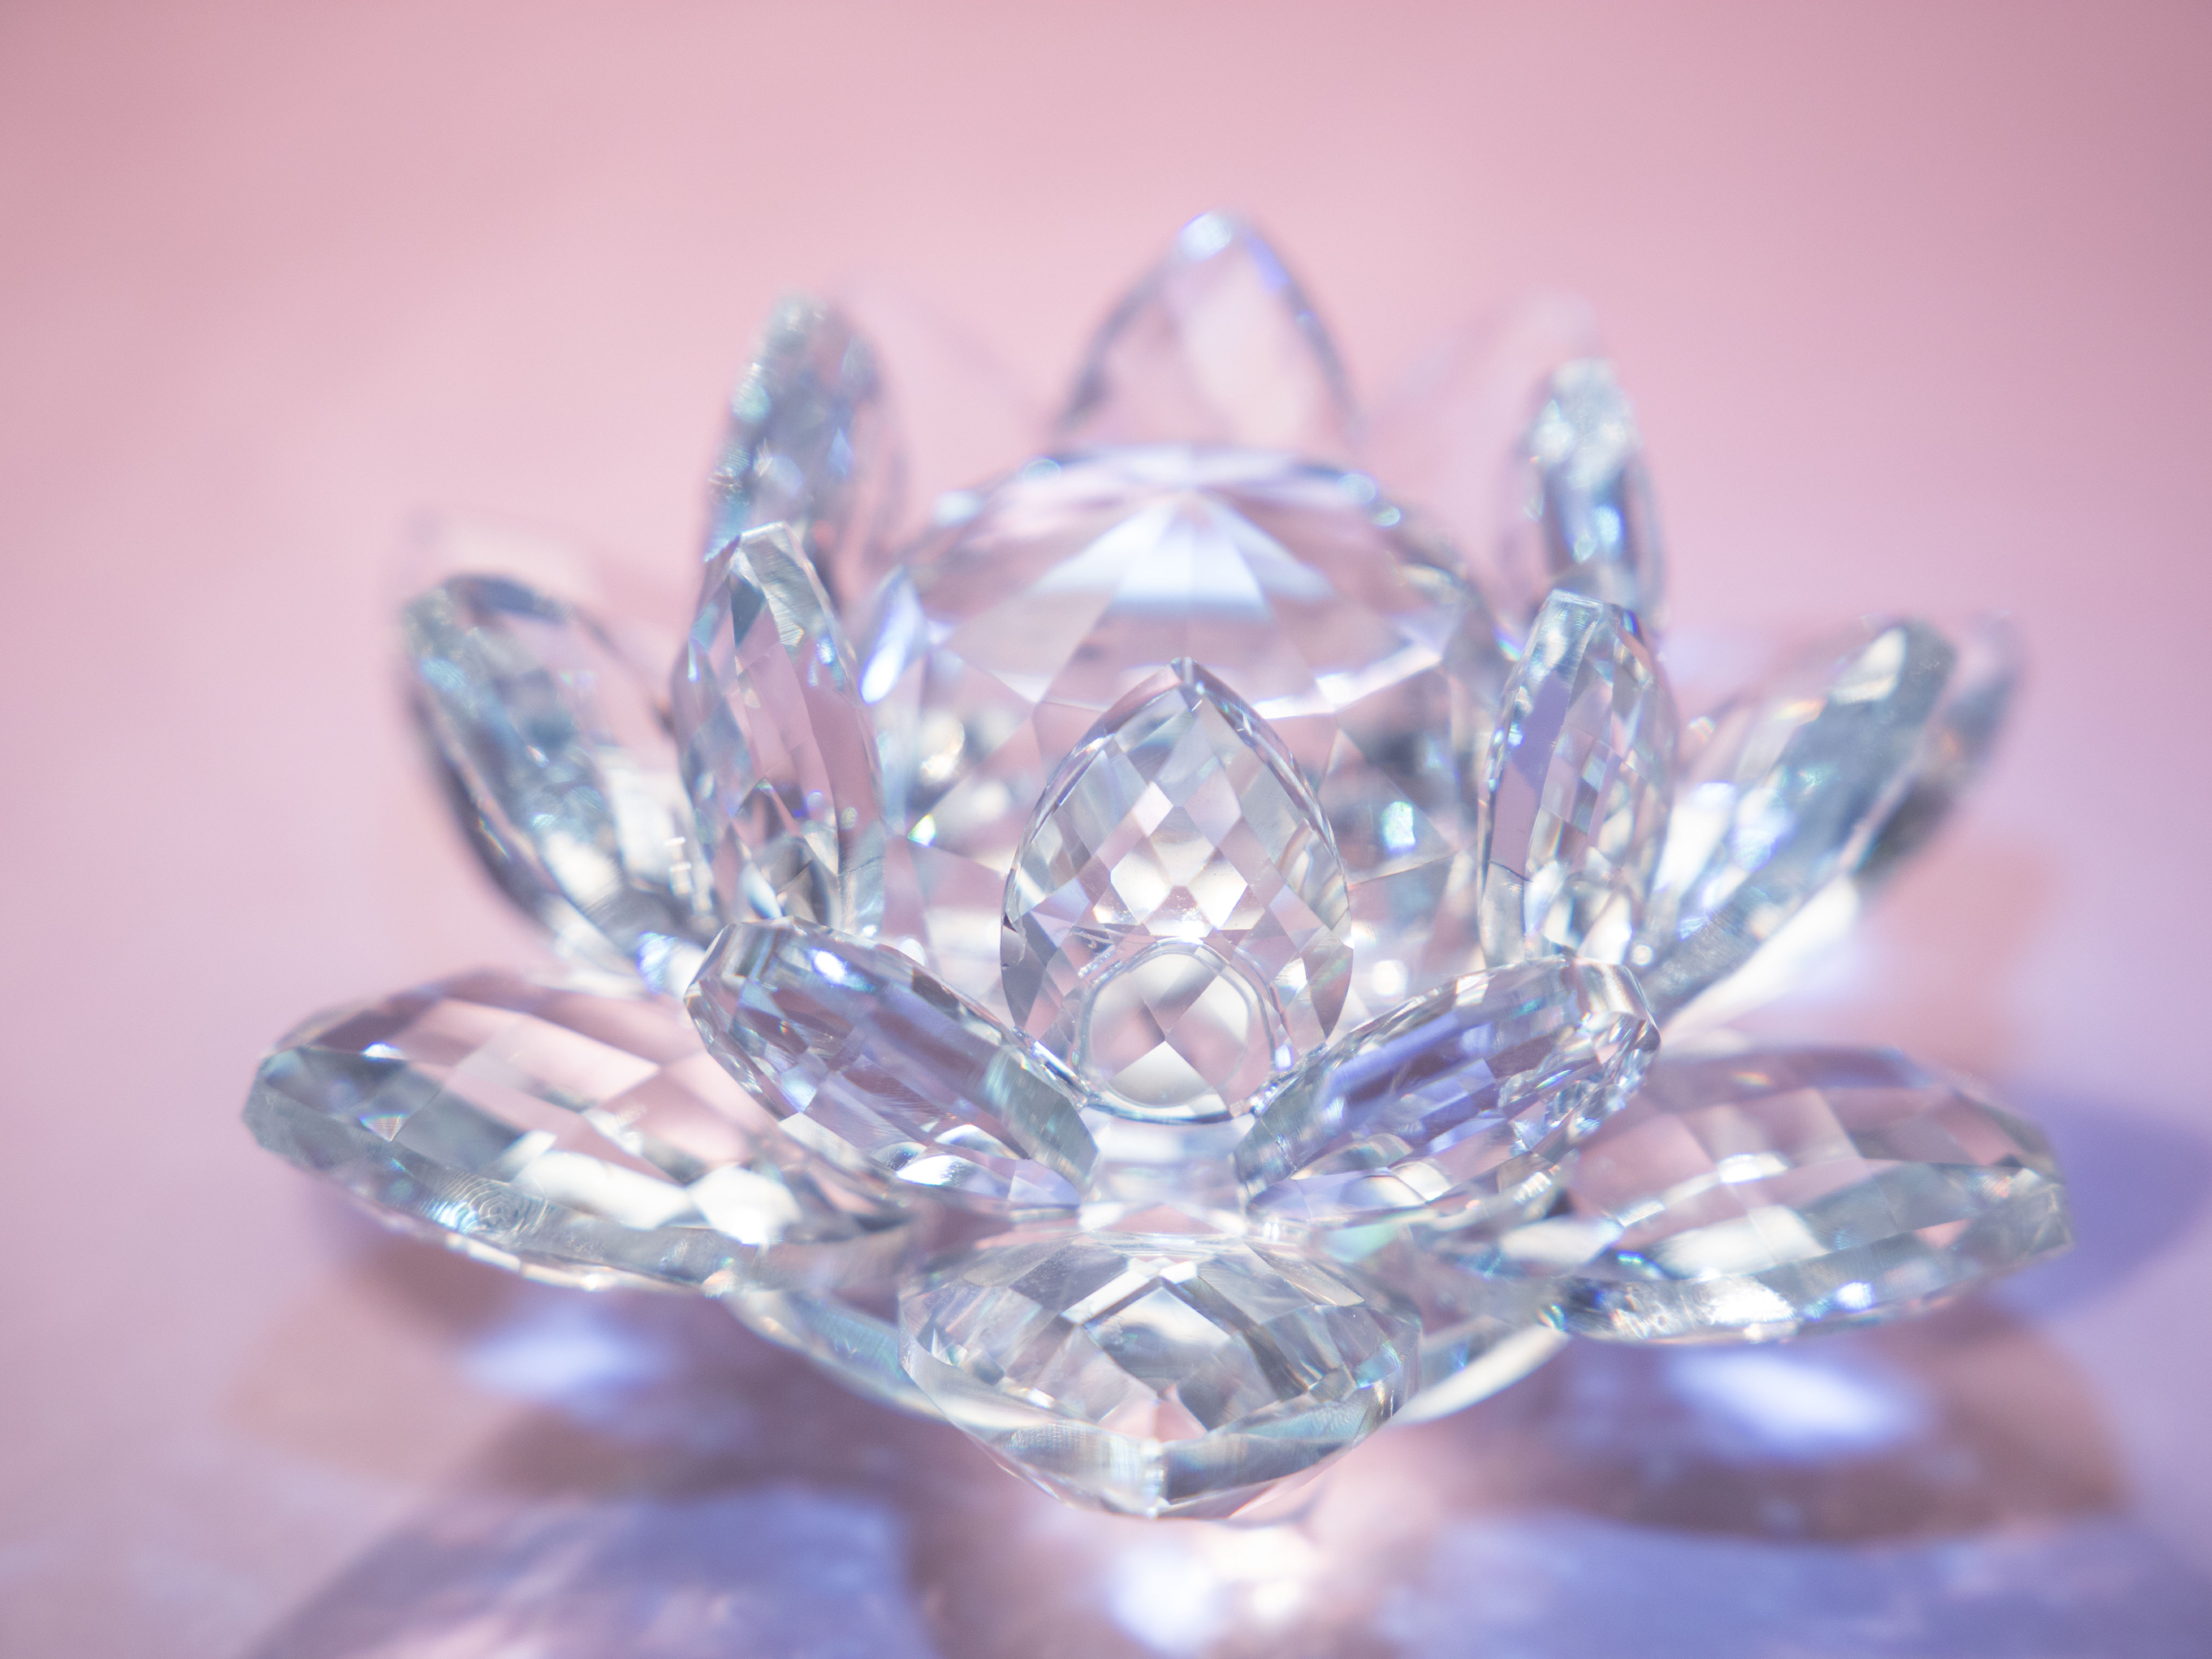 500 Crystal Pictures HD  Download Free Images on Unsplash